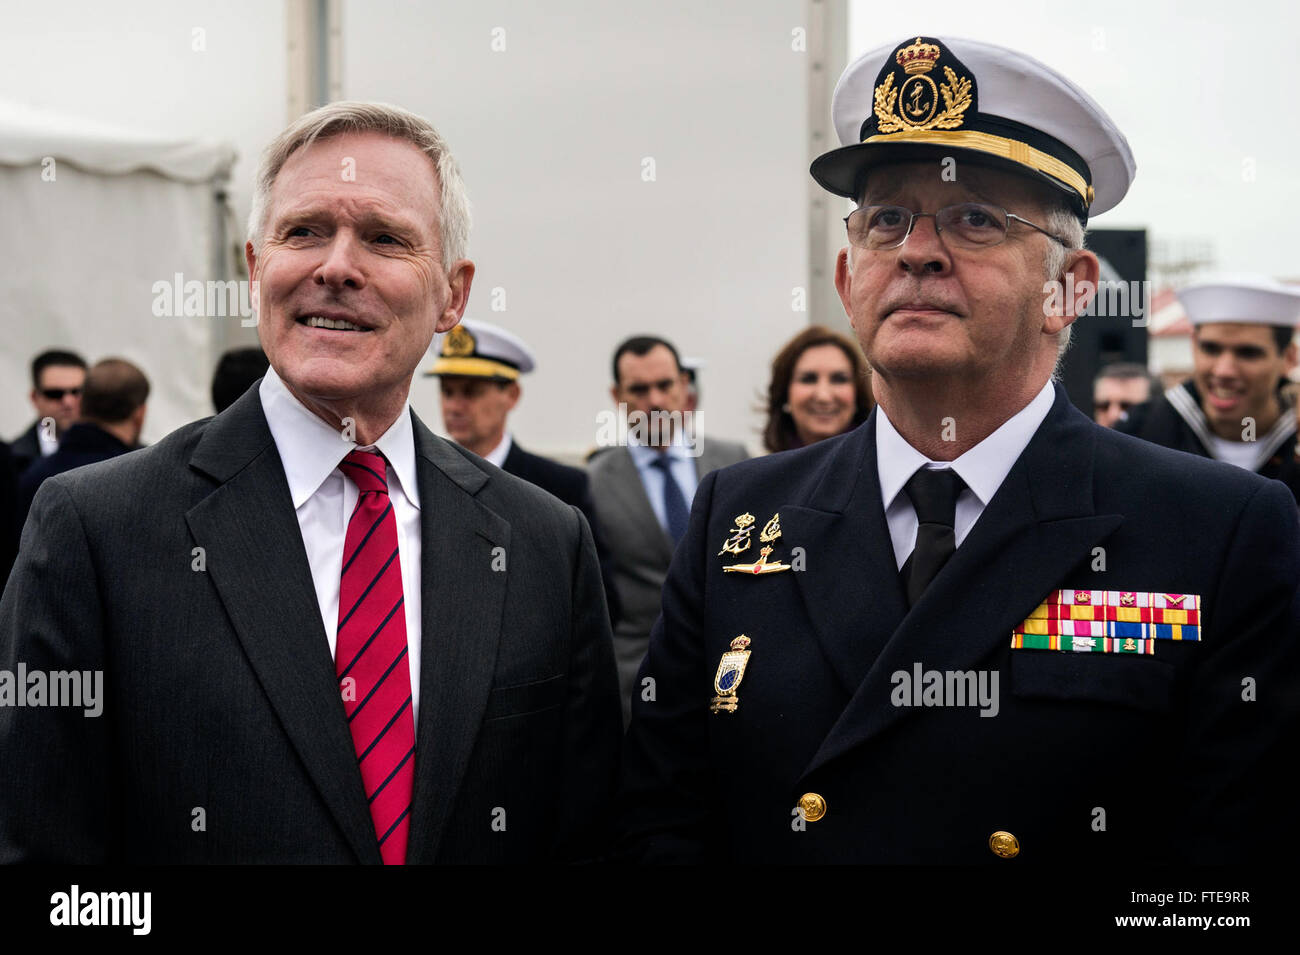 140211-N-KE519-004 ROTA, Spain (Feb. 11, 2014) - Secretary of the Navy Ray Mabus and Spanish Chief of Naval Staff, Admiral Jaime Munoz-Diaz del Rio, meet during a ceremony marking the arrival of the Arleigh Burke-class guided-missile destroyer USS Donald Cook (DDG 75) to Naval Station Rota. Donald Cook is the first of four Arleigh Burke-class guided-missile destroyers to be stationed in Rota. (U.S. Navy photo by Mass Communication Specialist Seaman Edward Guttierrez III/RELEASED)  Join the conversation on Twitter ( https://twitter.com/naveur navaf )  follow us on Facebook ( https://www.faceboo Stock Photo